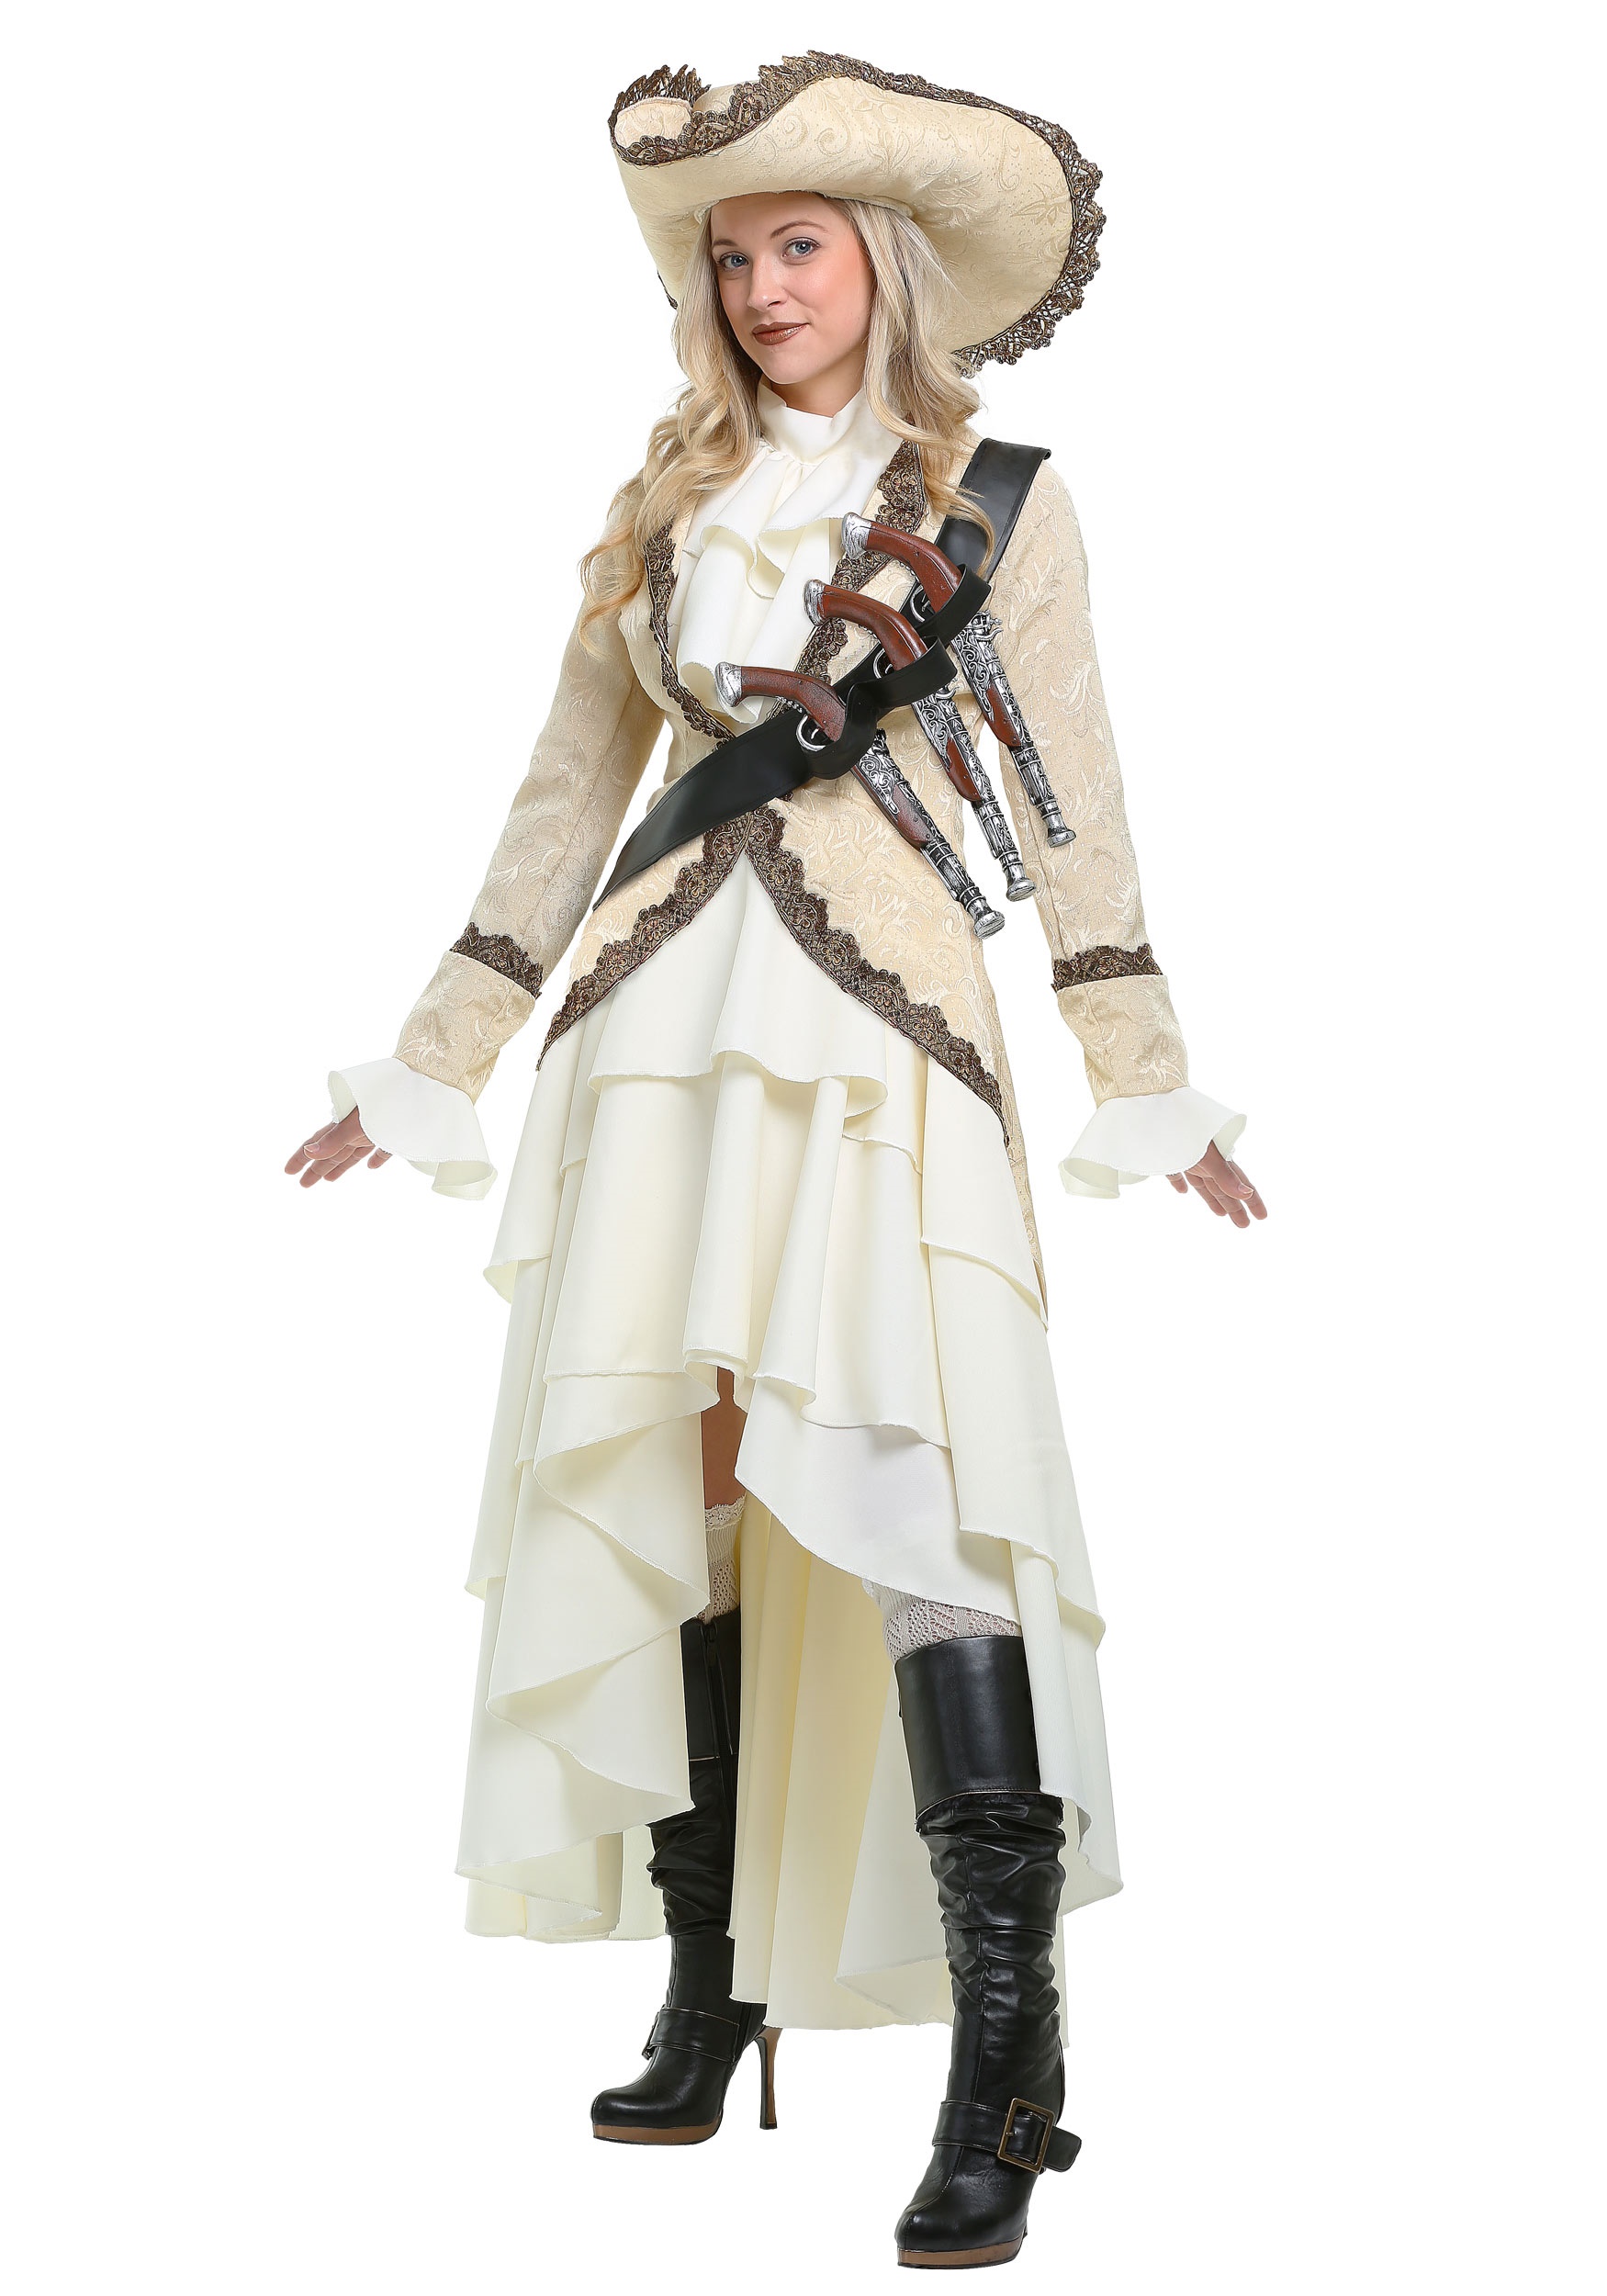 49 Ivory & Black Pirate Deluxe Women Adult Halloween Costume - Small